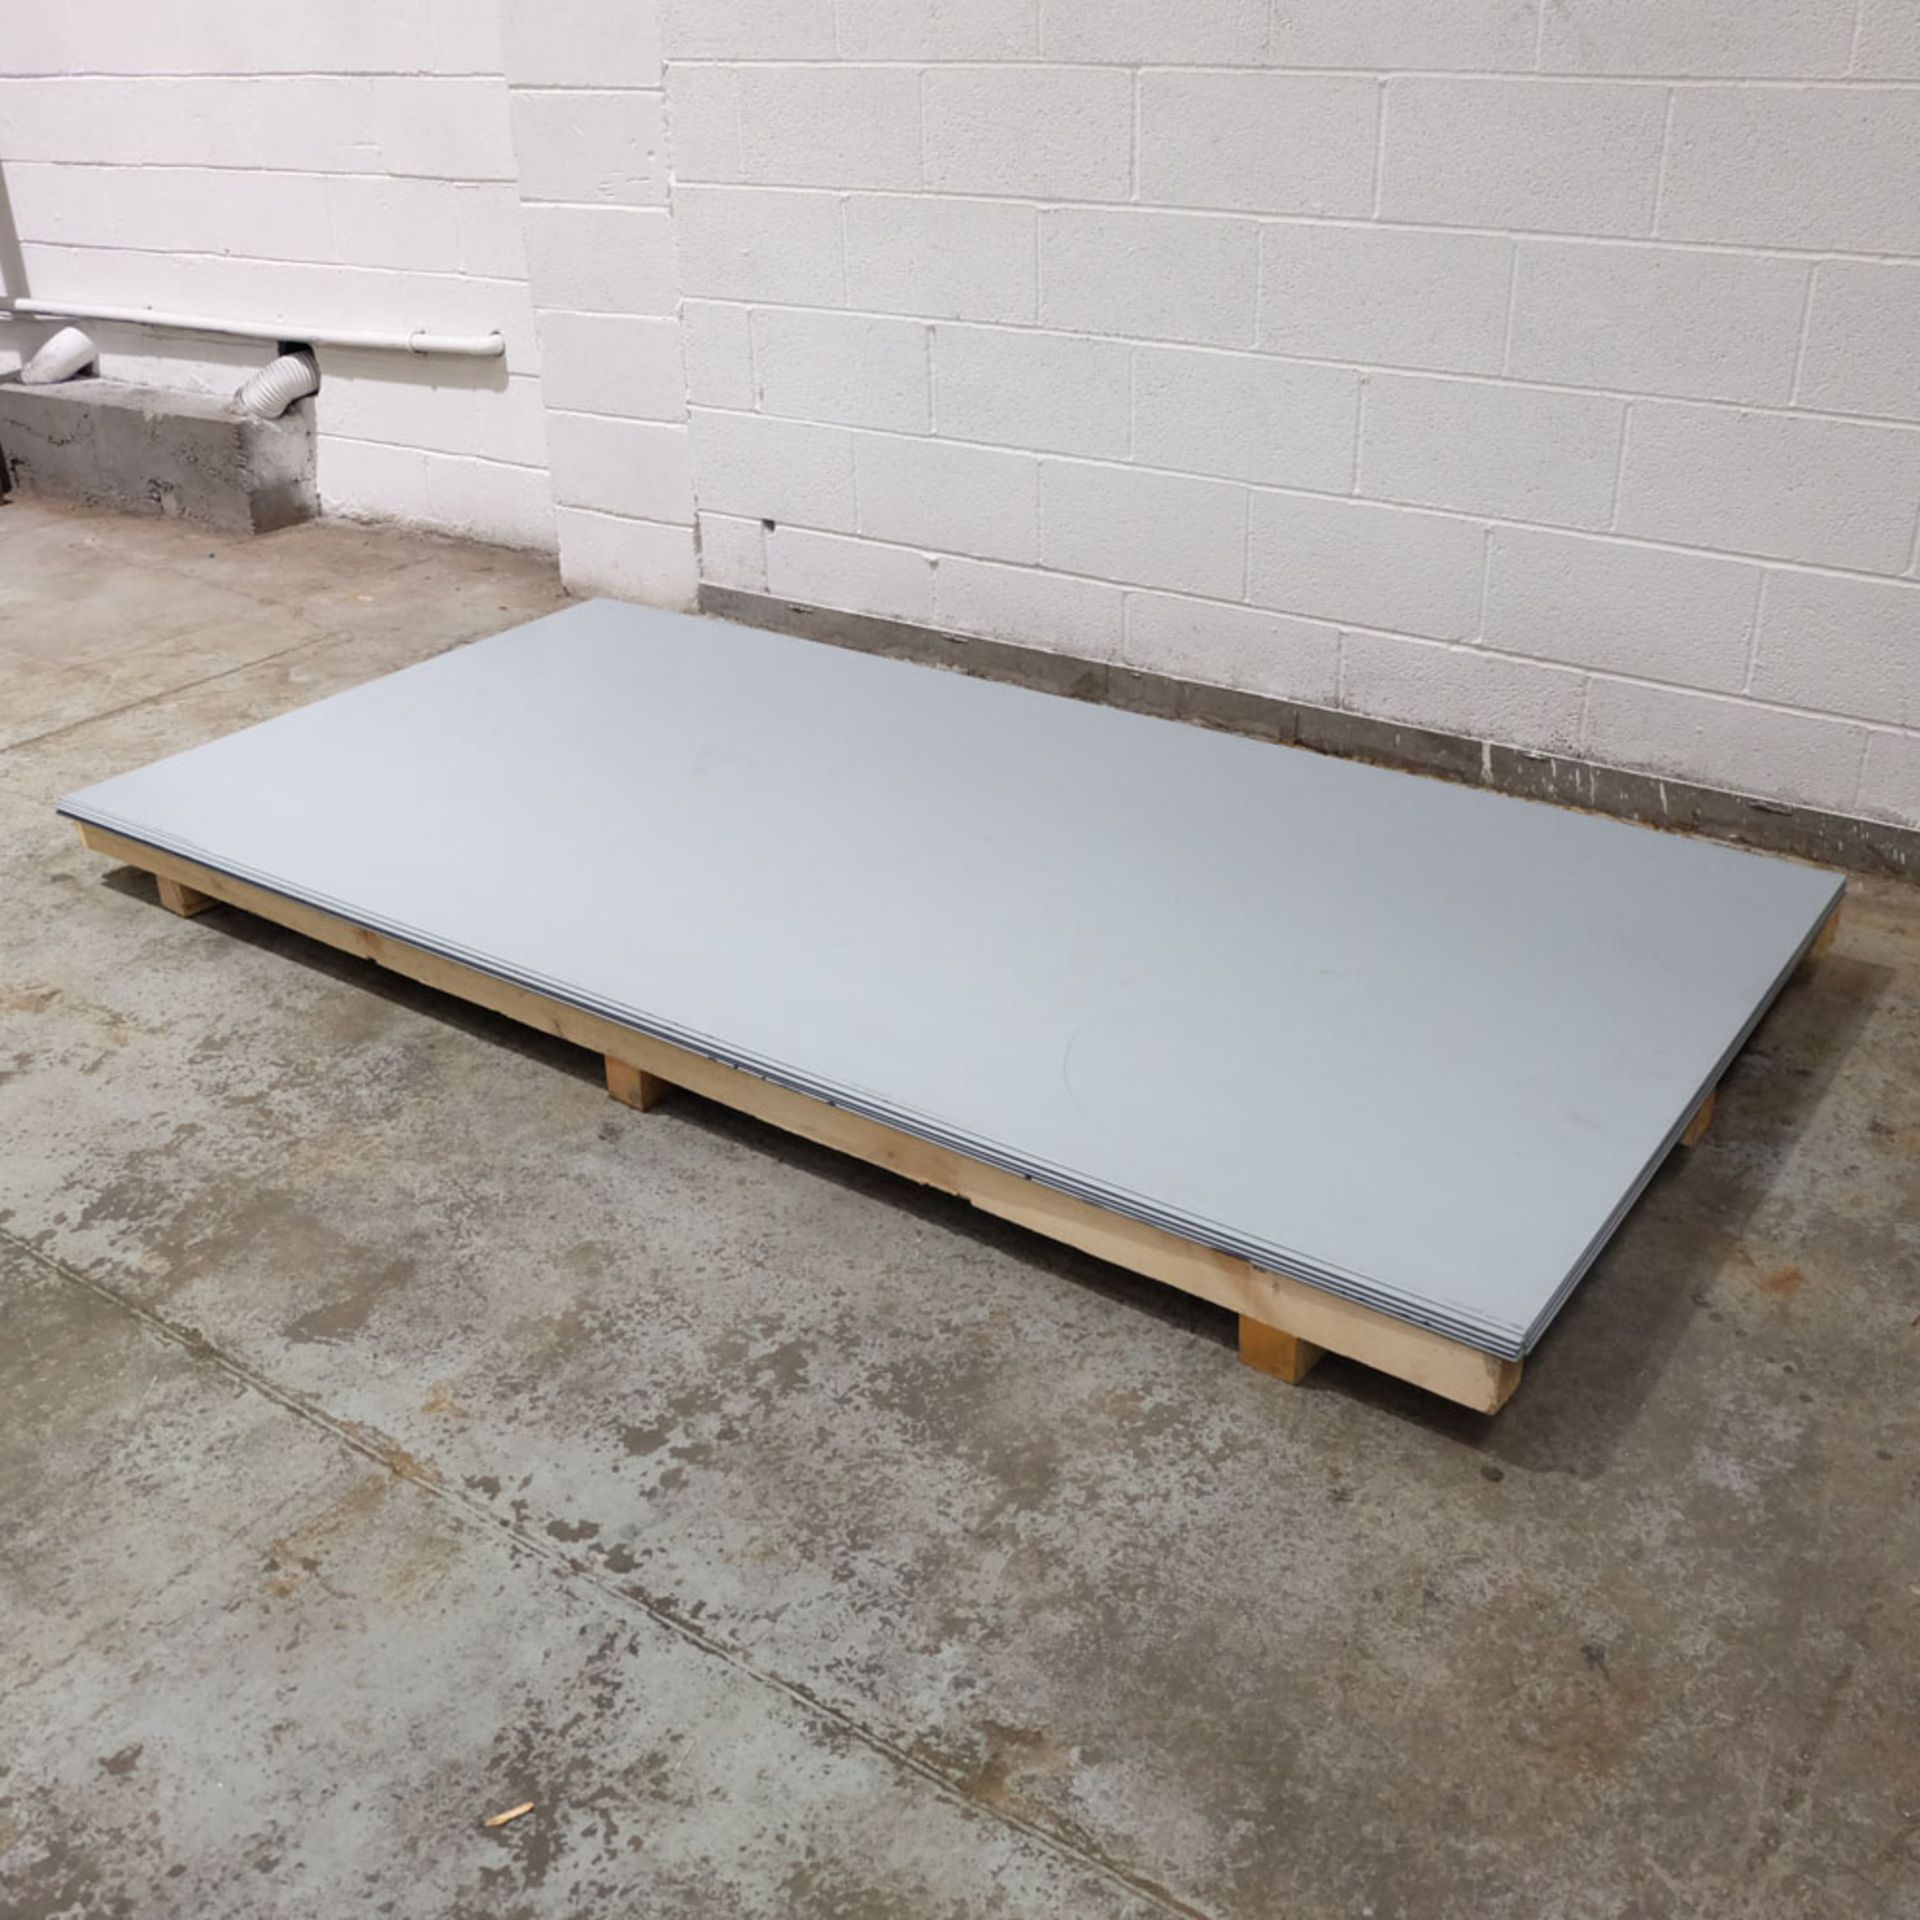 10 x Steel Sheets. Approx 2500mm x 1250mm x 3mm Thickness. - Image 3 of 4